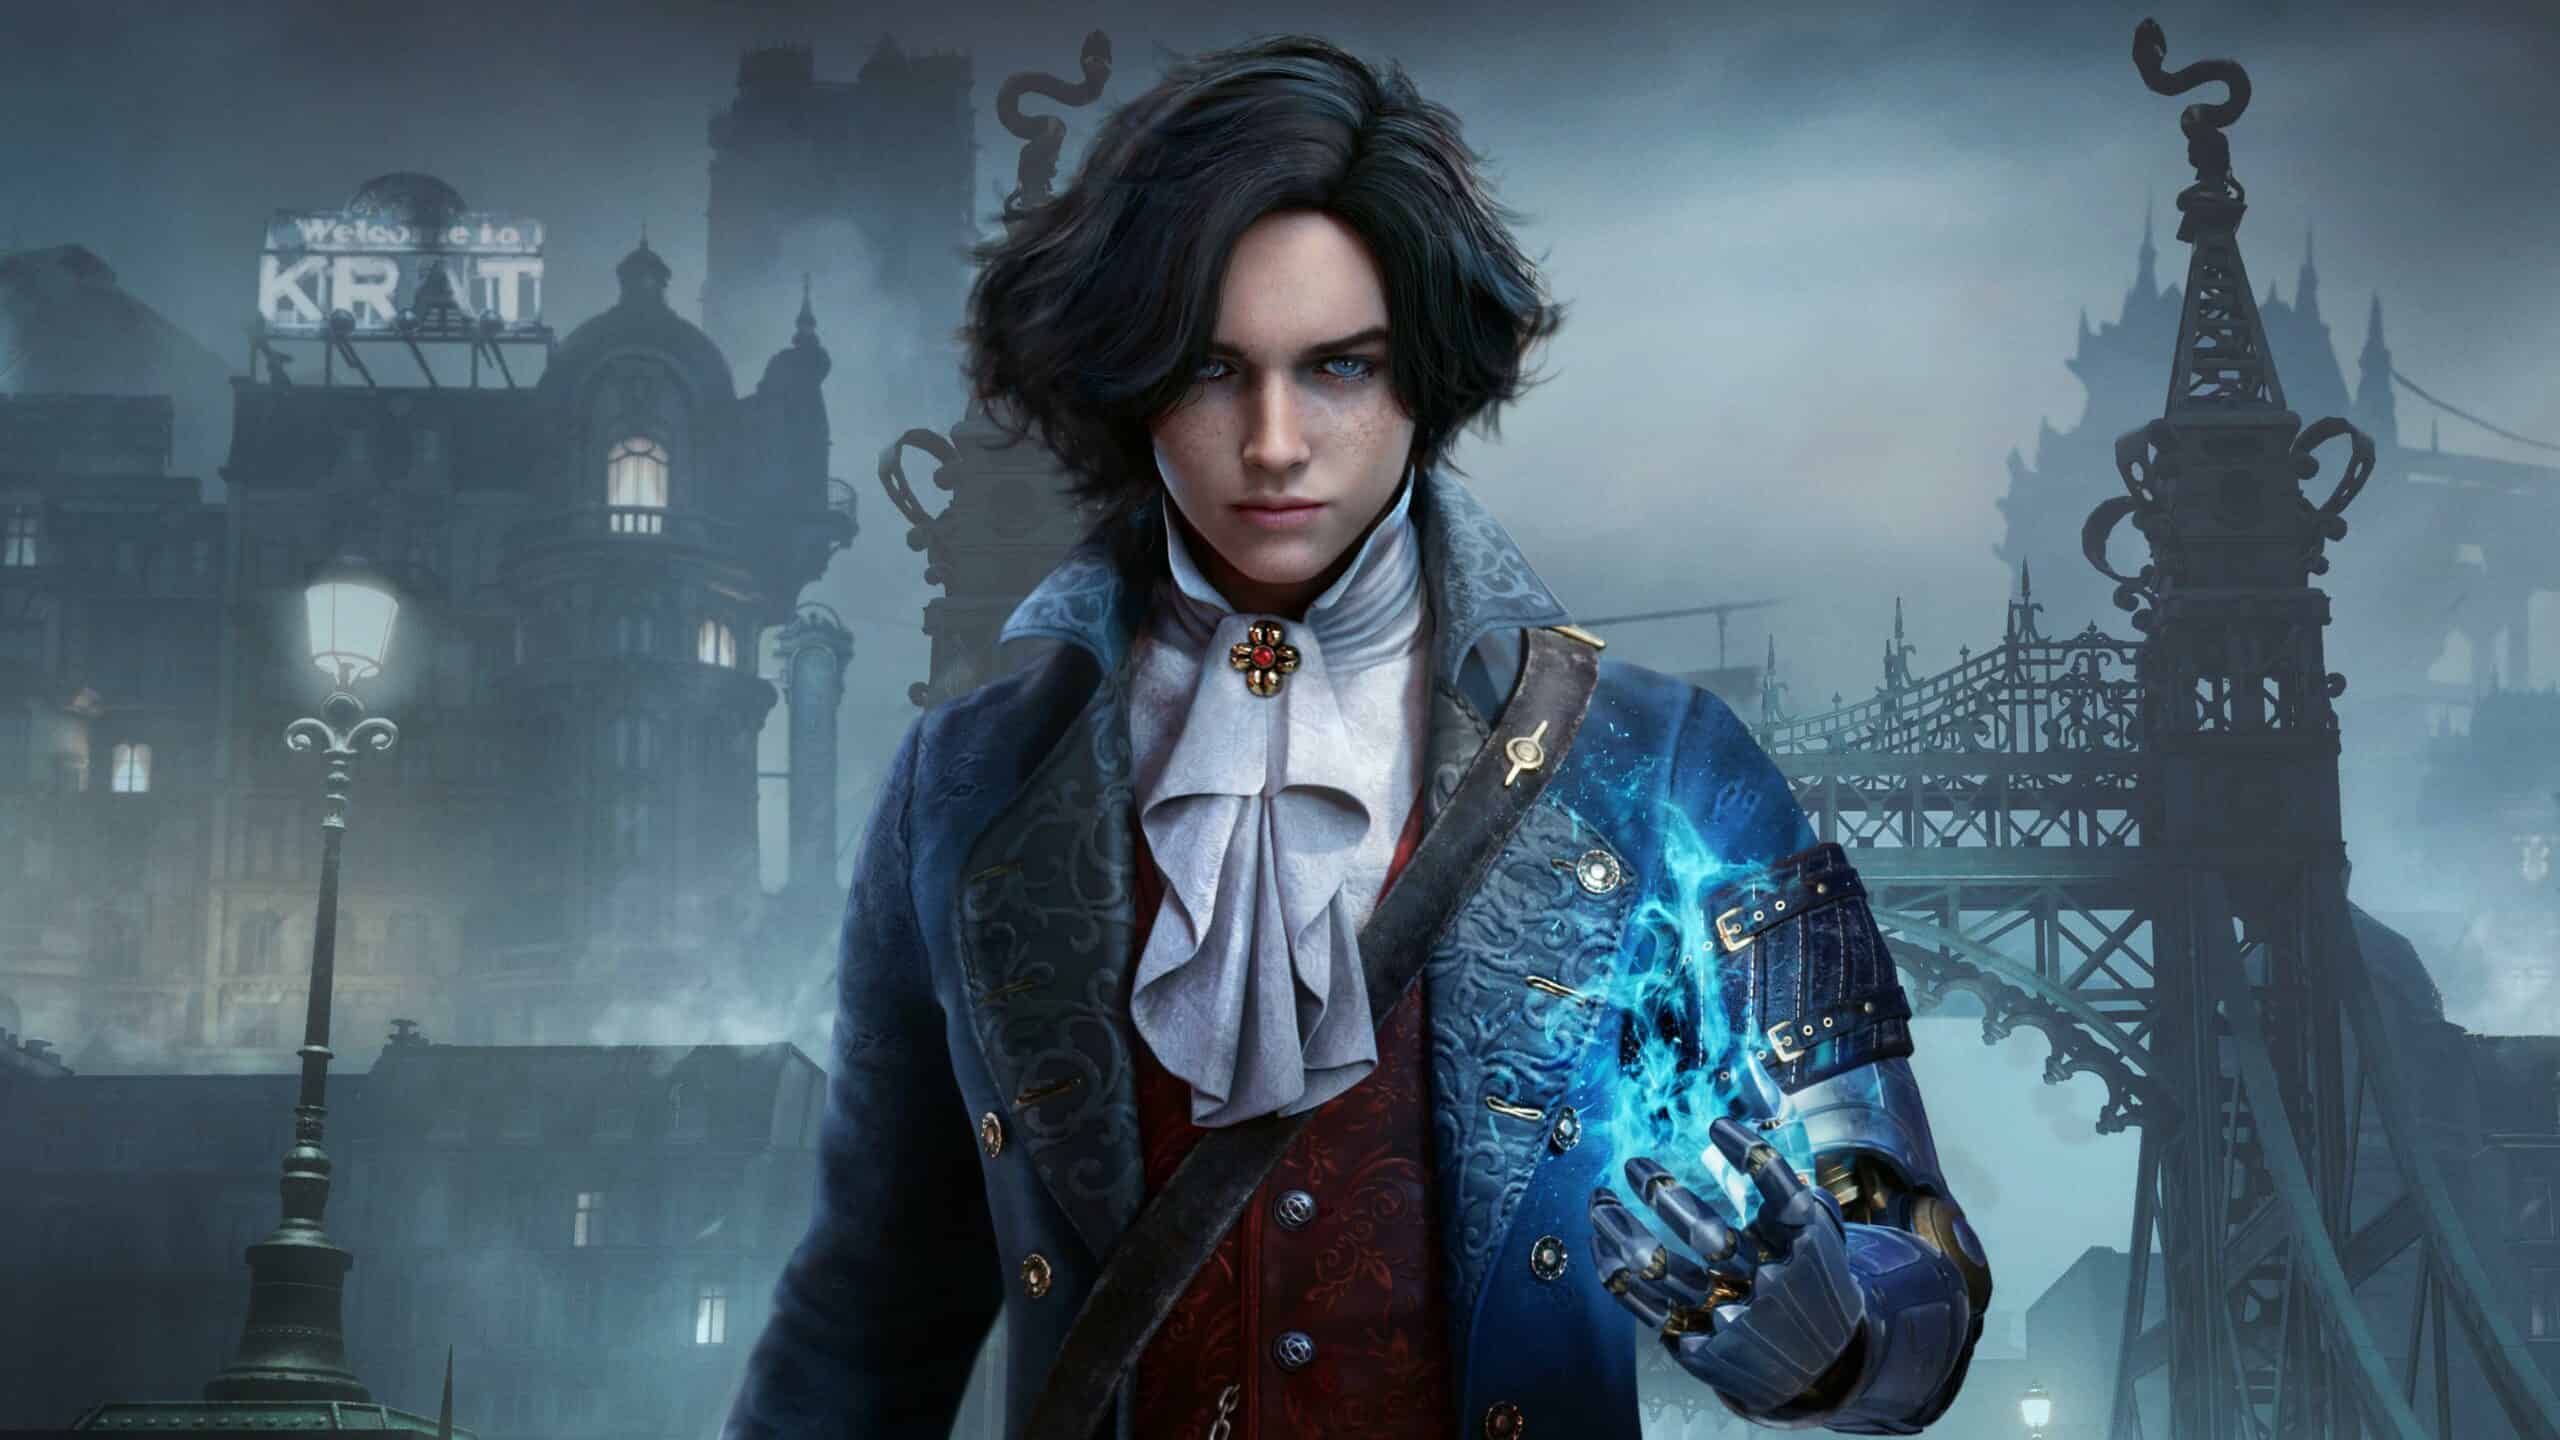 Fantasy character with dark hair in an ornate blue coat casting a blue magical spell from her right hand, standing before a foggy, gothic cityscape.